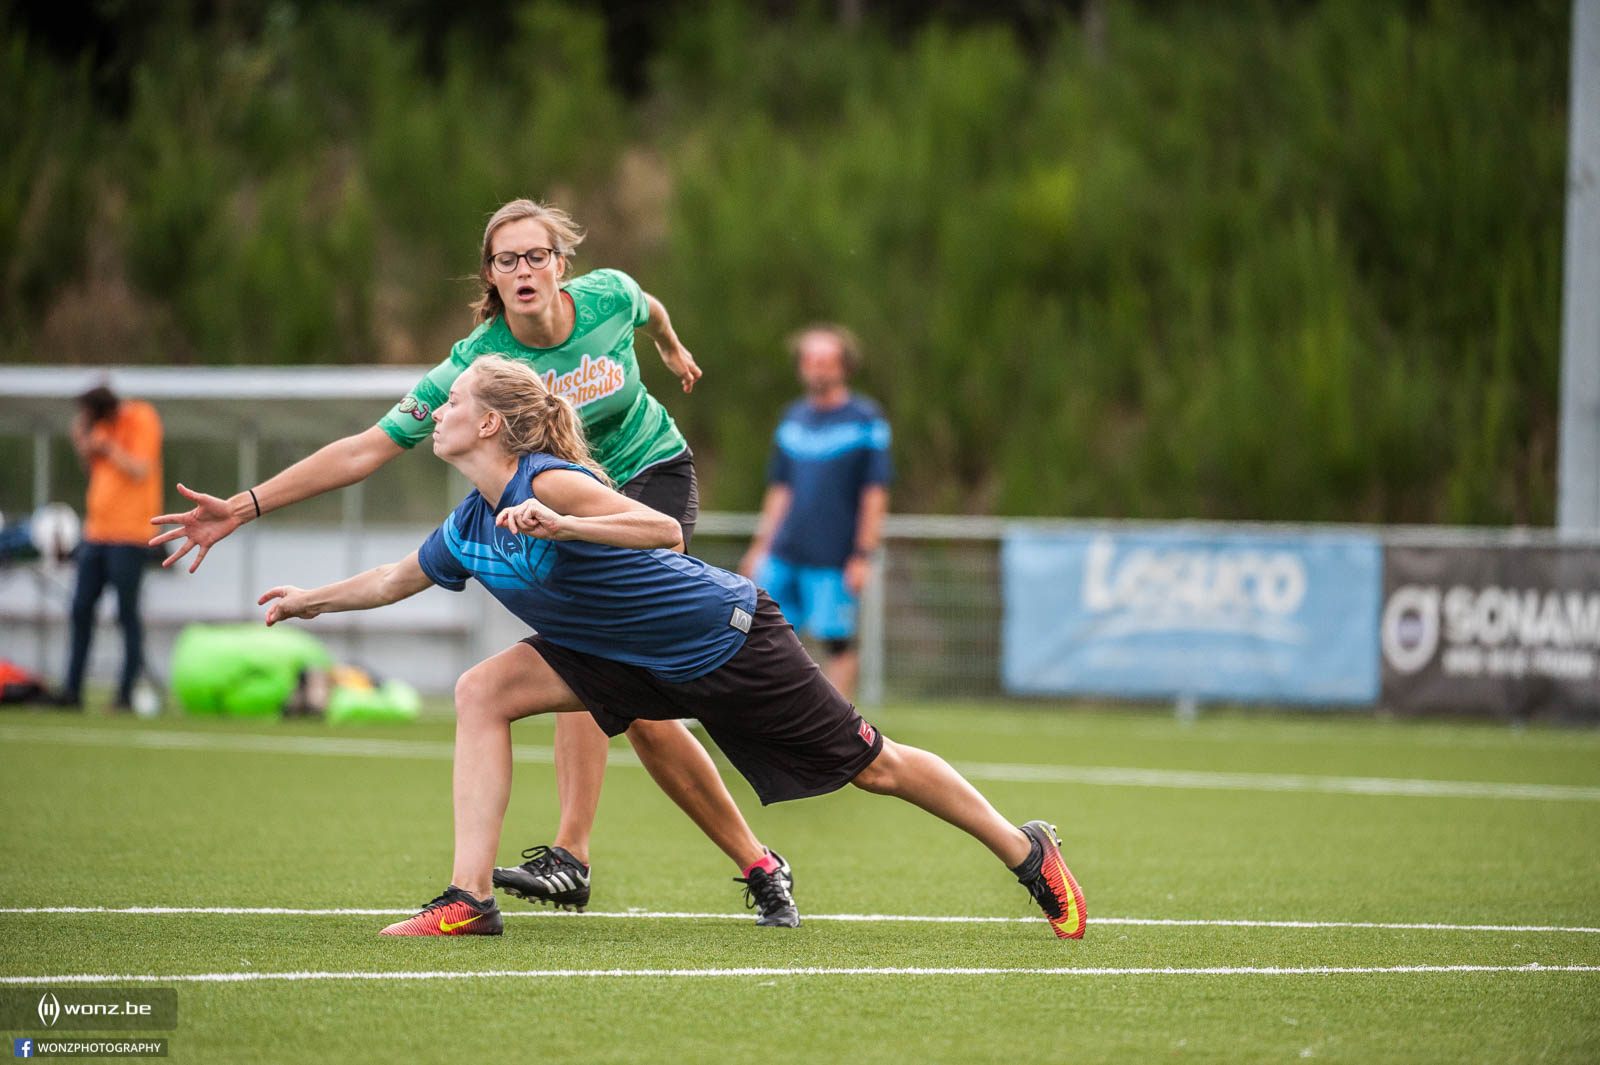 Pictures of I don't Carrot All 2018, Ultimate Mixed Frisbee Tournament from the Flying Rabbits - Brussels.